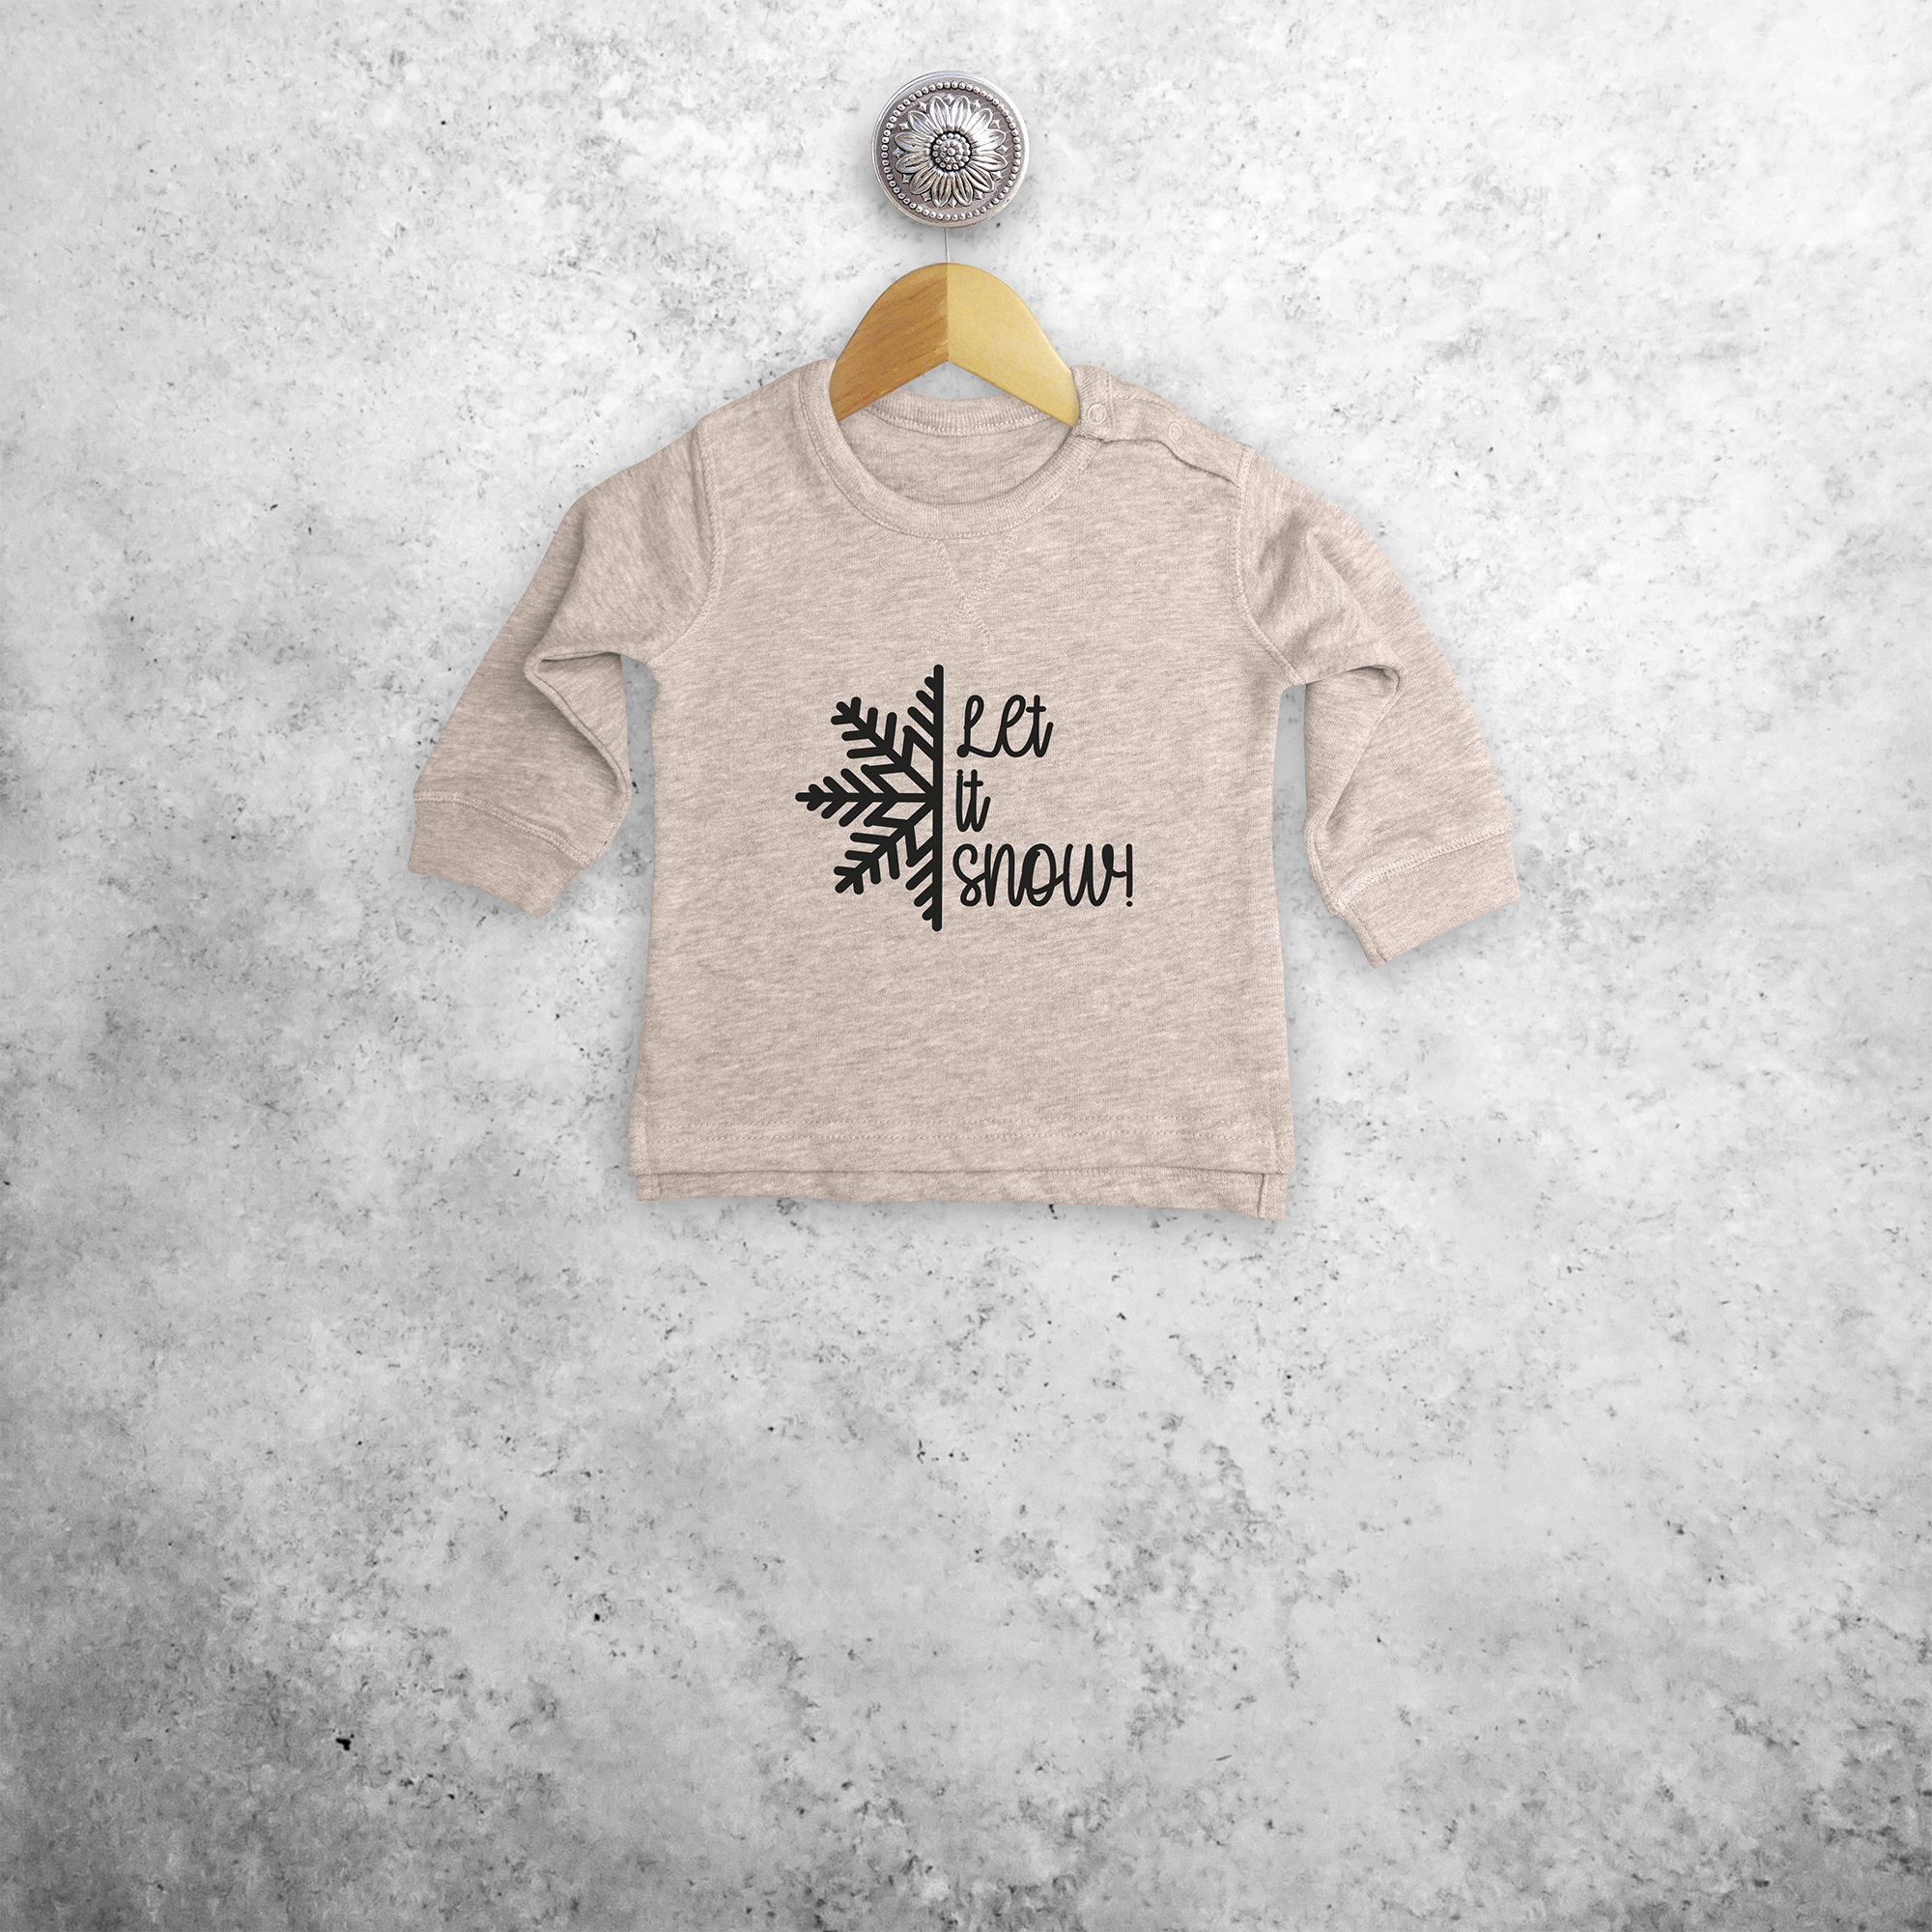 'Let it snow' baby sweater